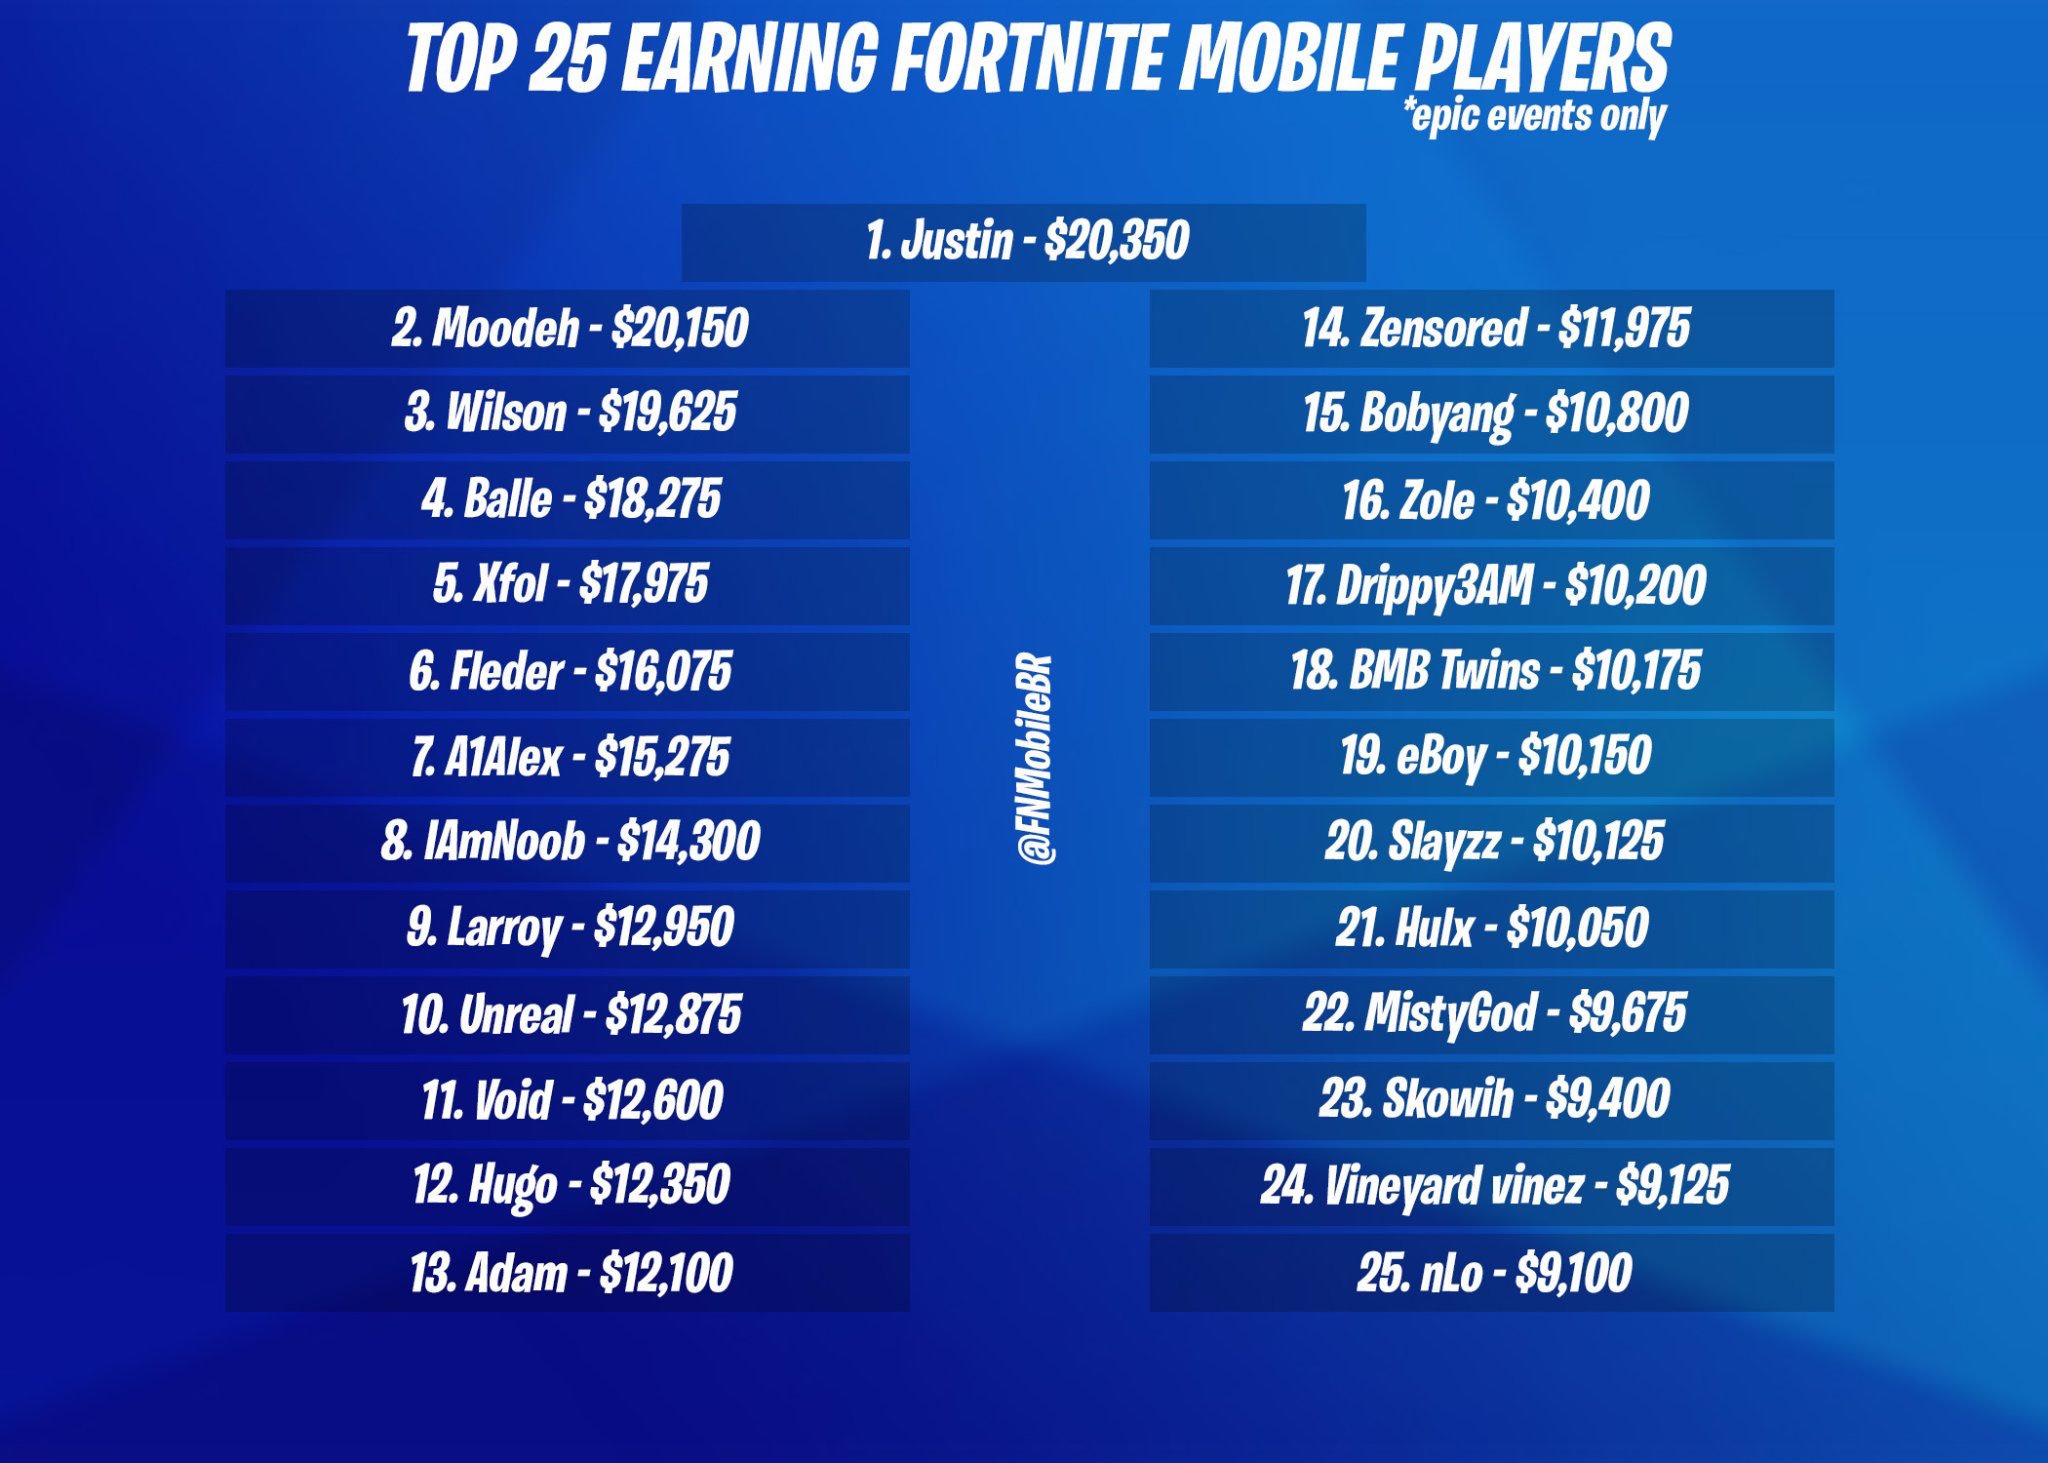 Mobile Gaming on Twitter: "Top 25 Earning Fortnite Mobile Players *epic only https://t.co/p04An2aWRs" / Twitter